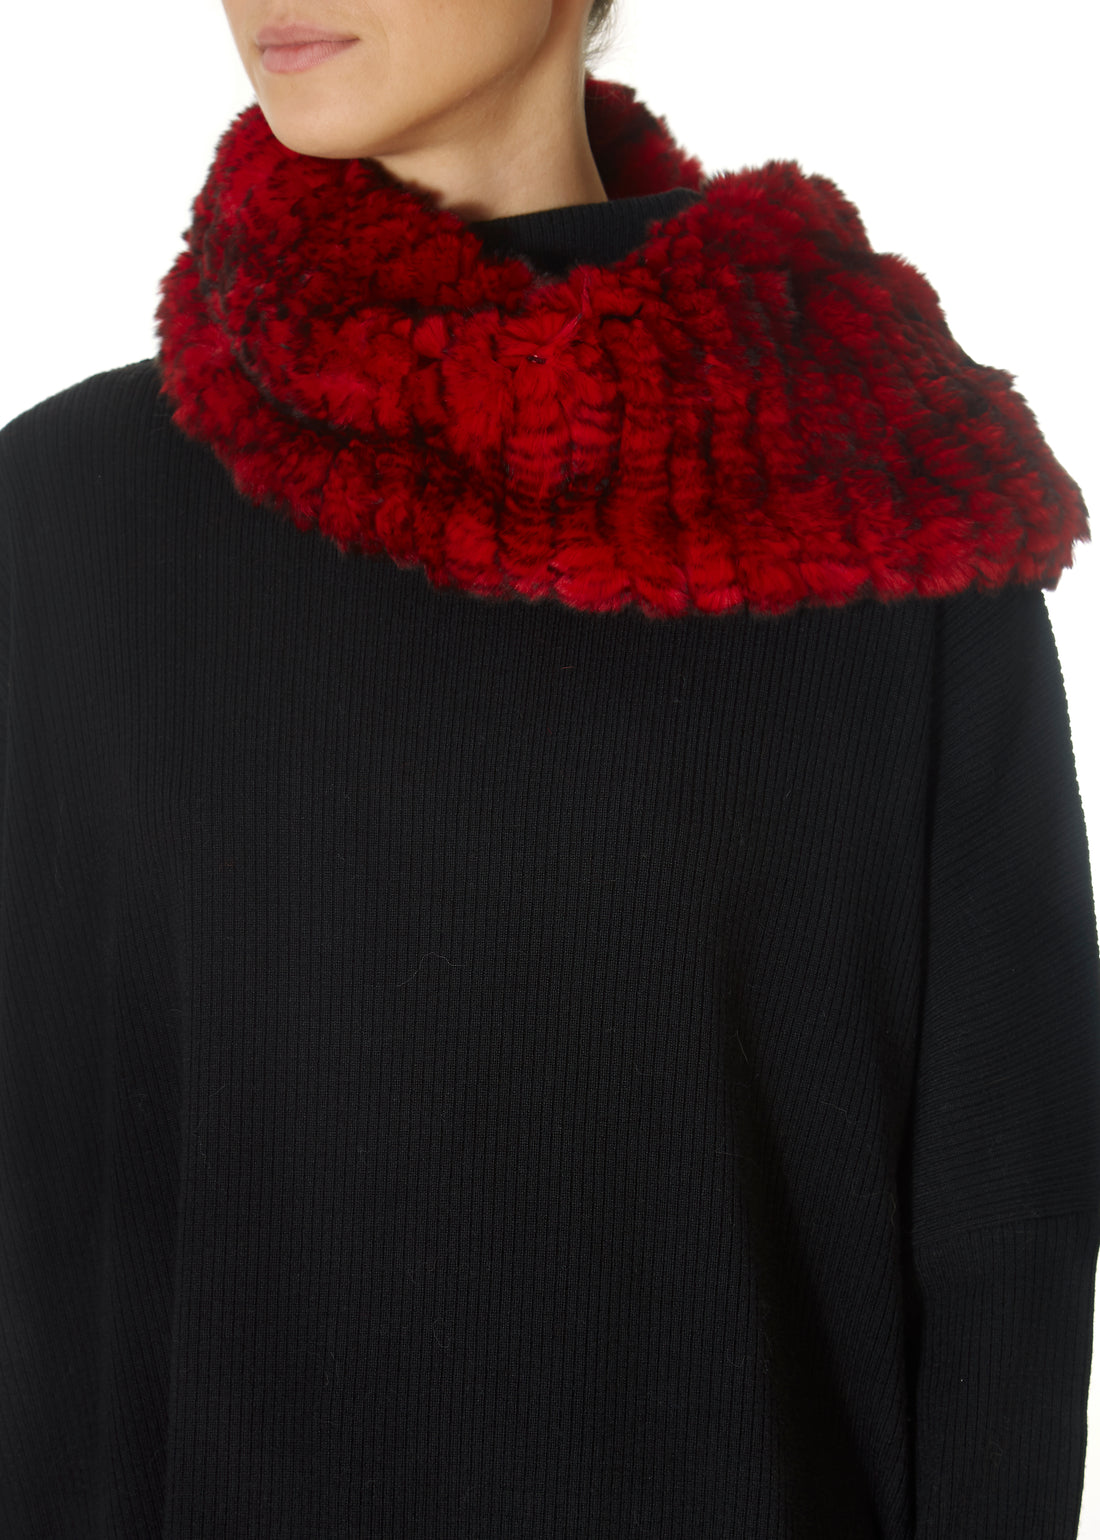 Red Snowtop Knitted Rabbit Single Snood Scarf - Jessimara